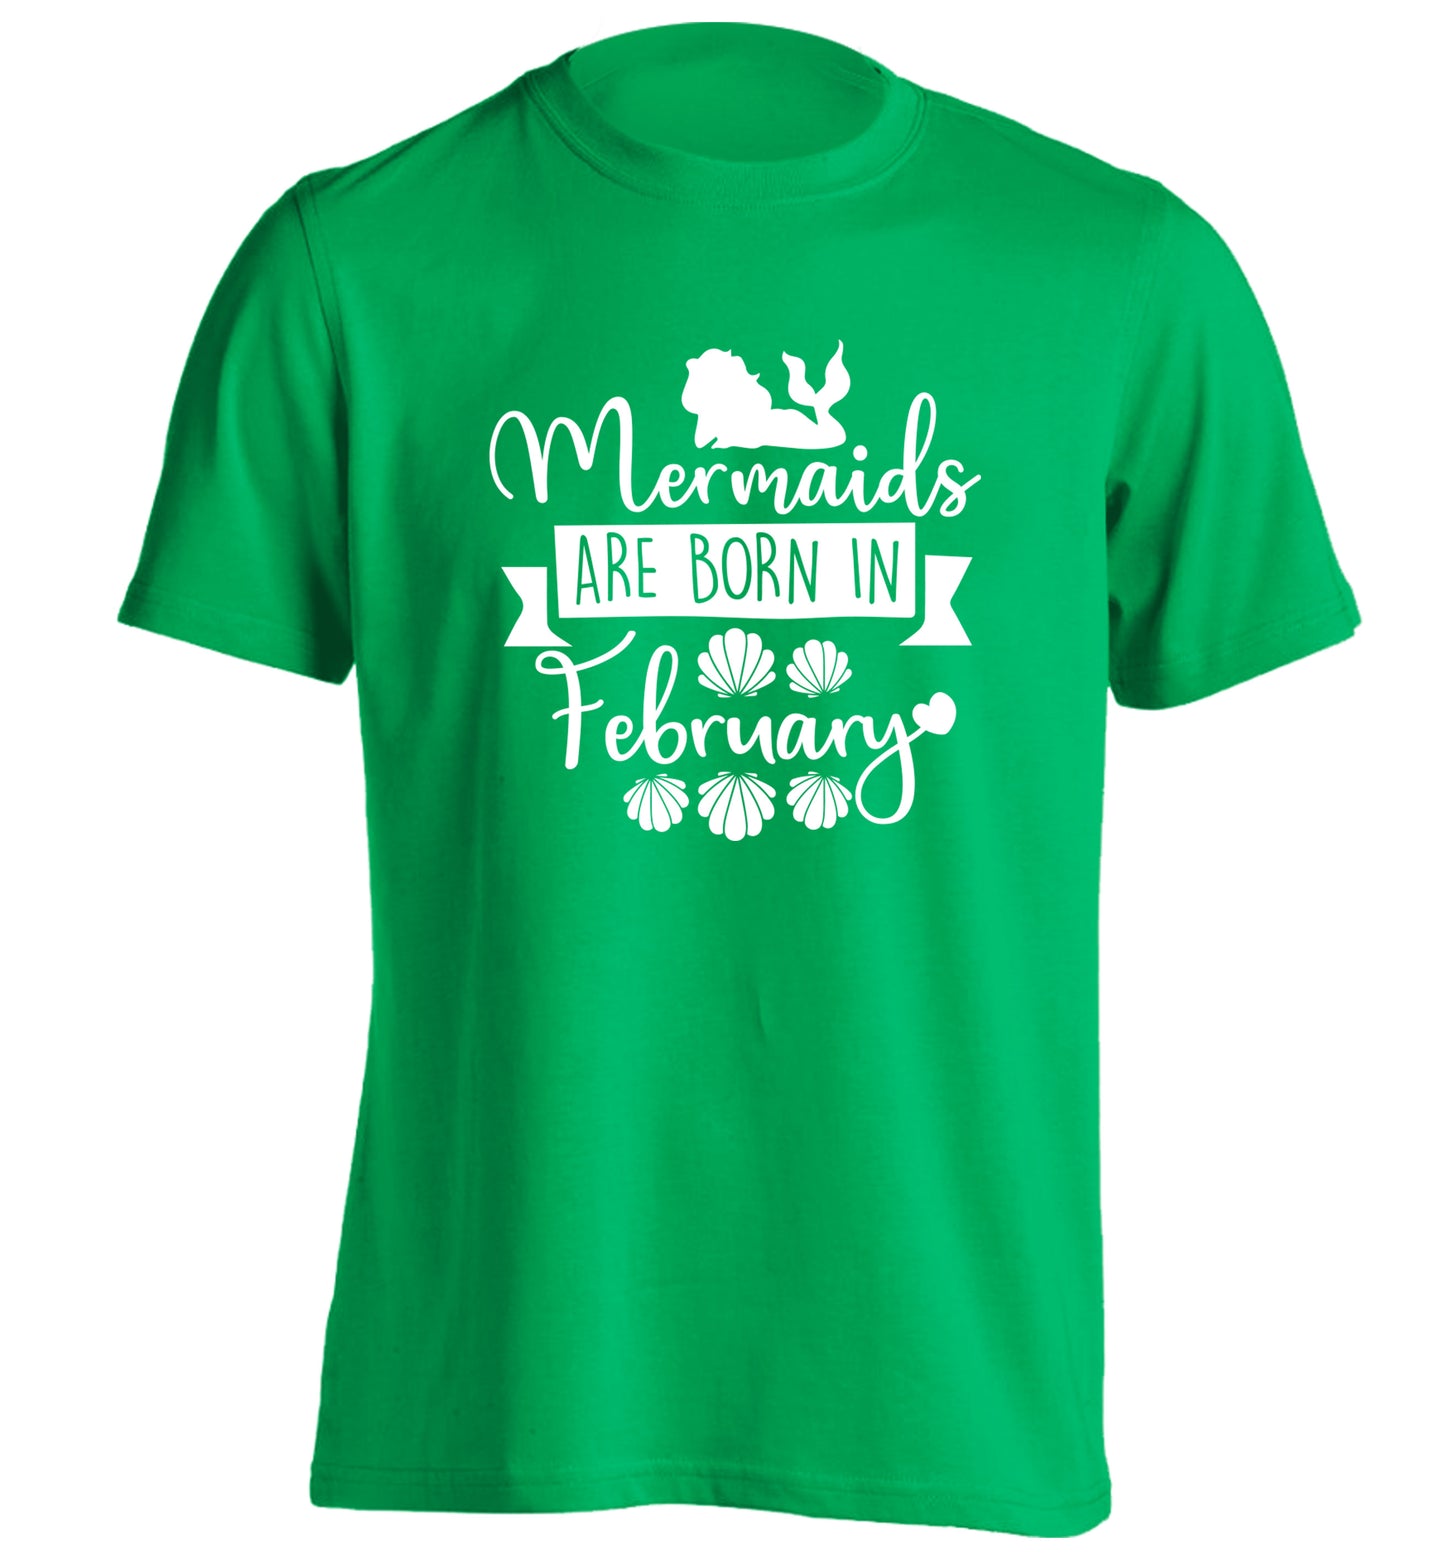 Mermaids are born in February adults unisex green Tshirt 2XL